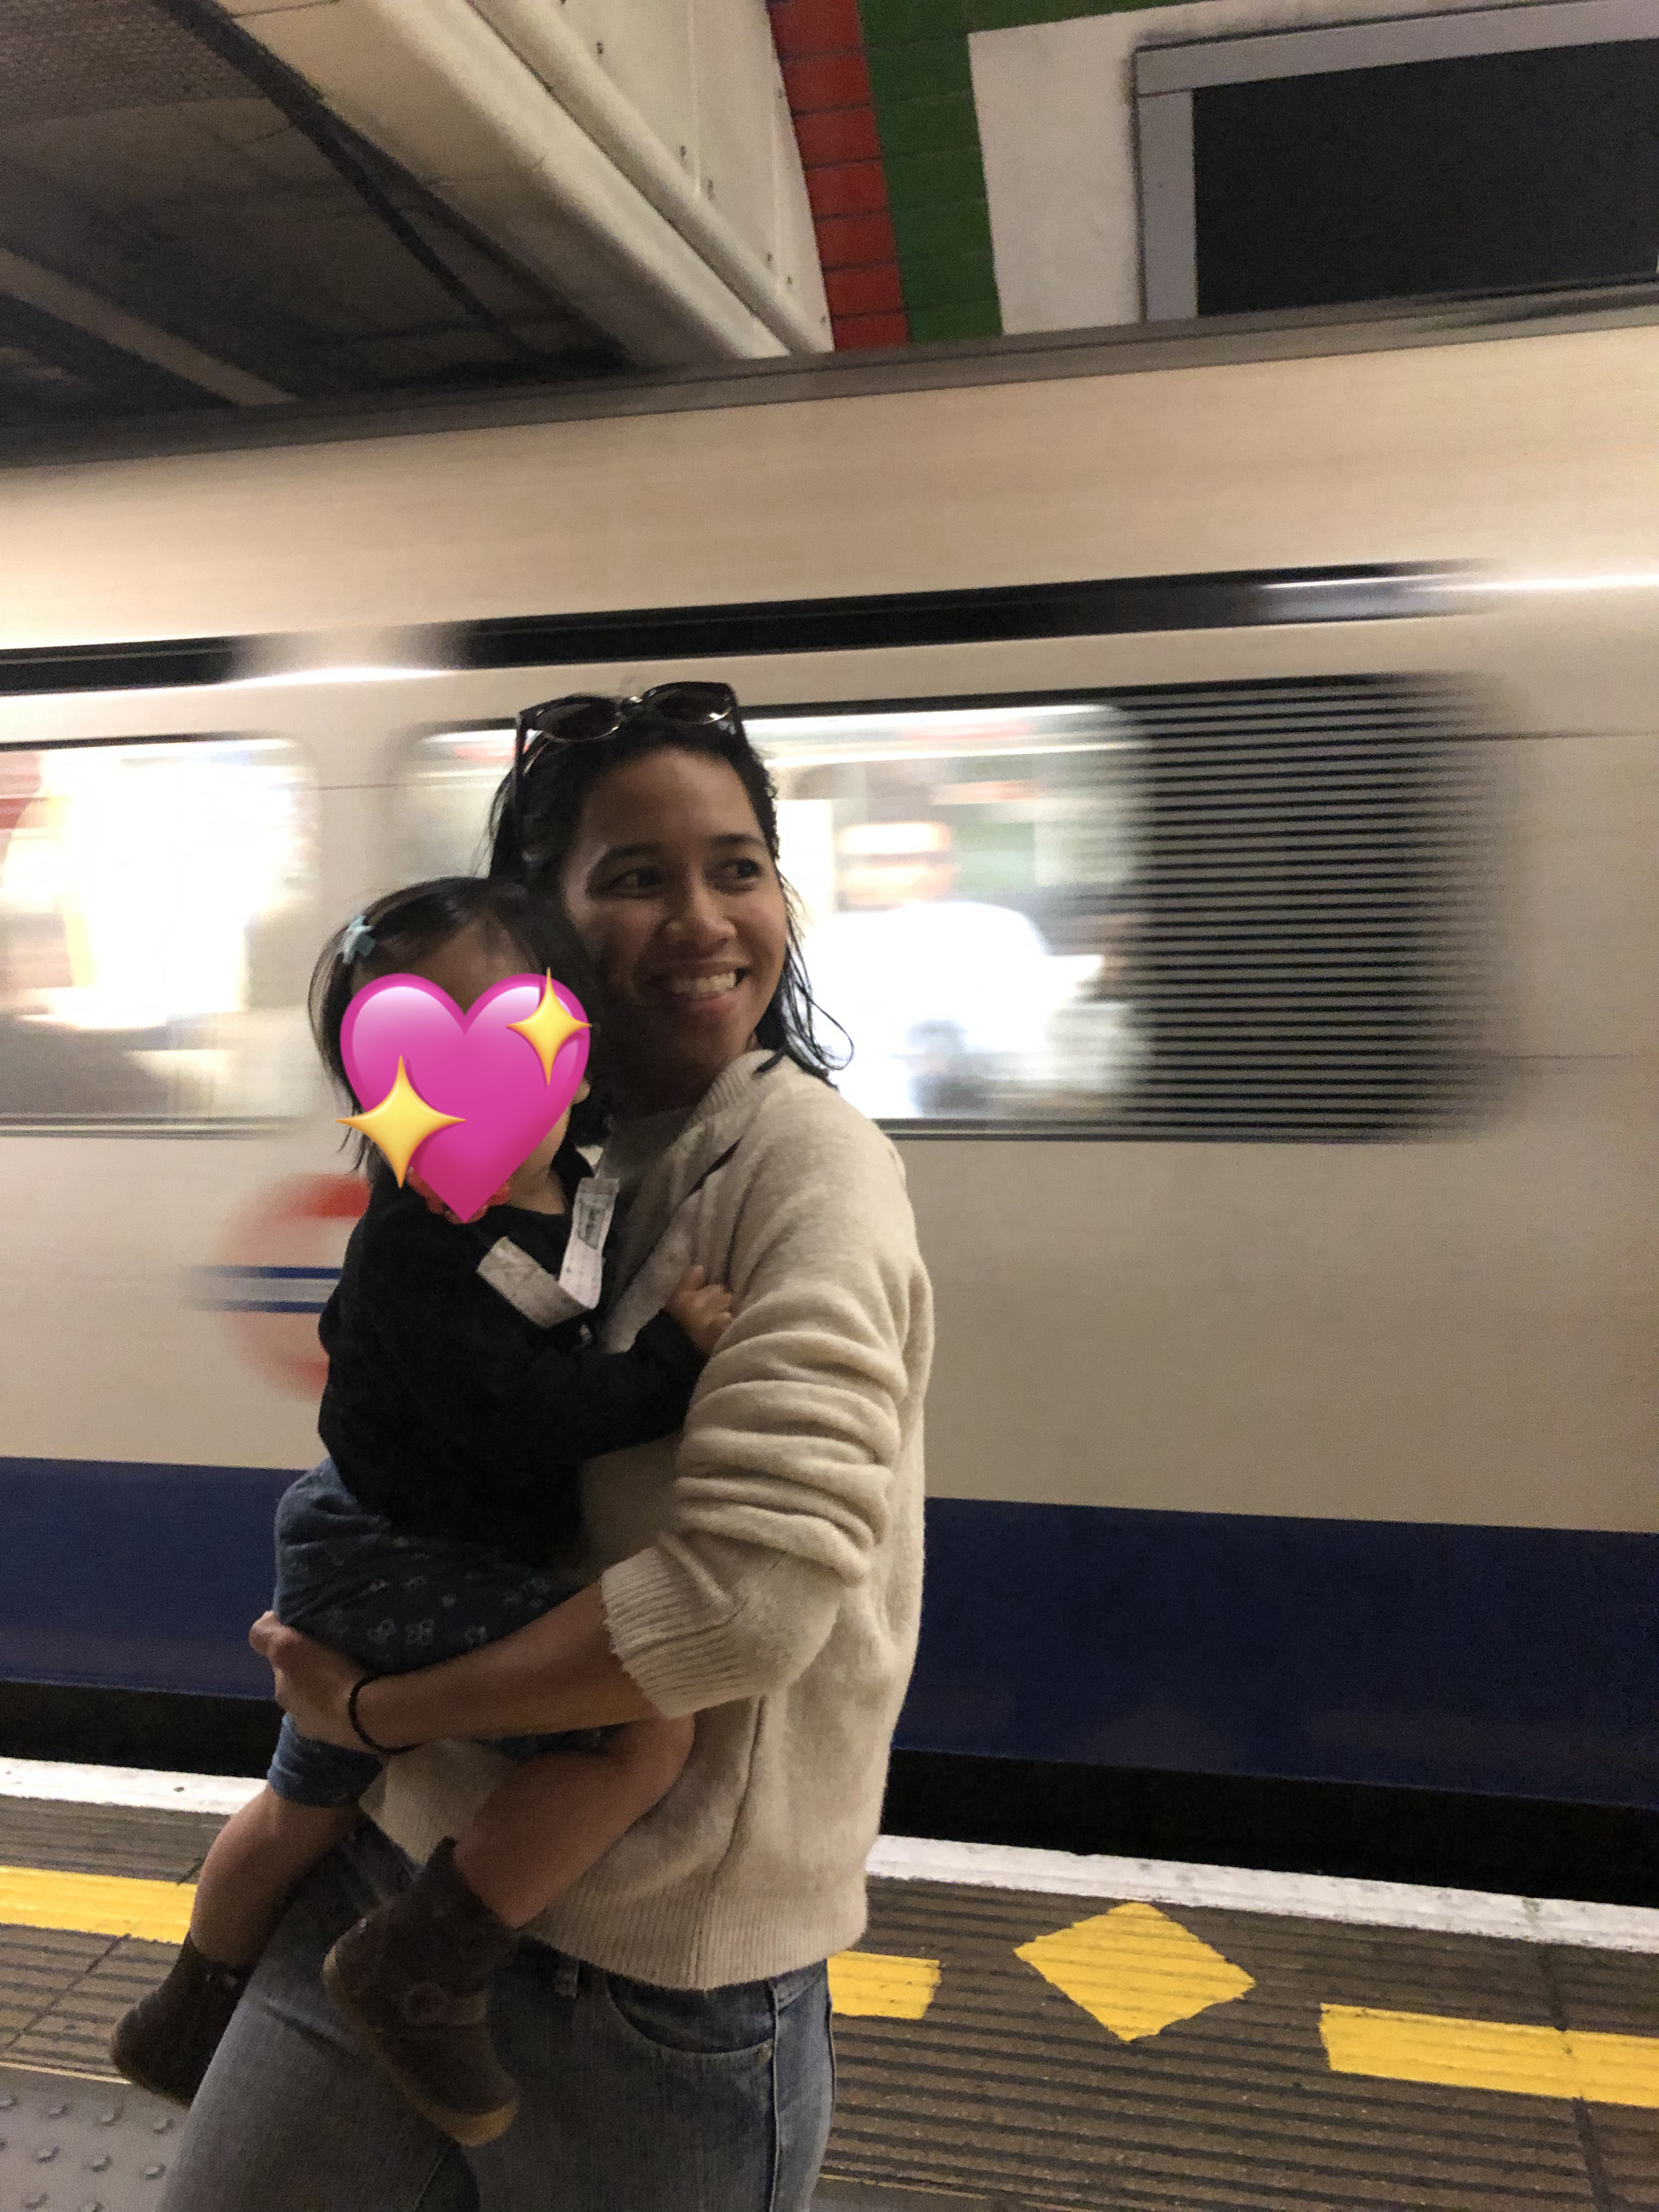 Holding her child, Angelica smiles in front of a passing train.